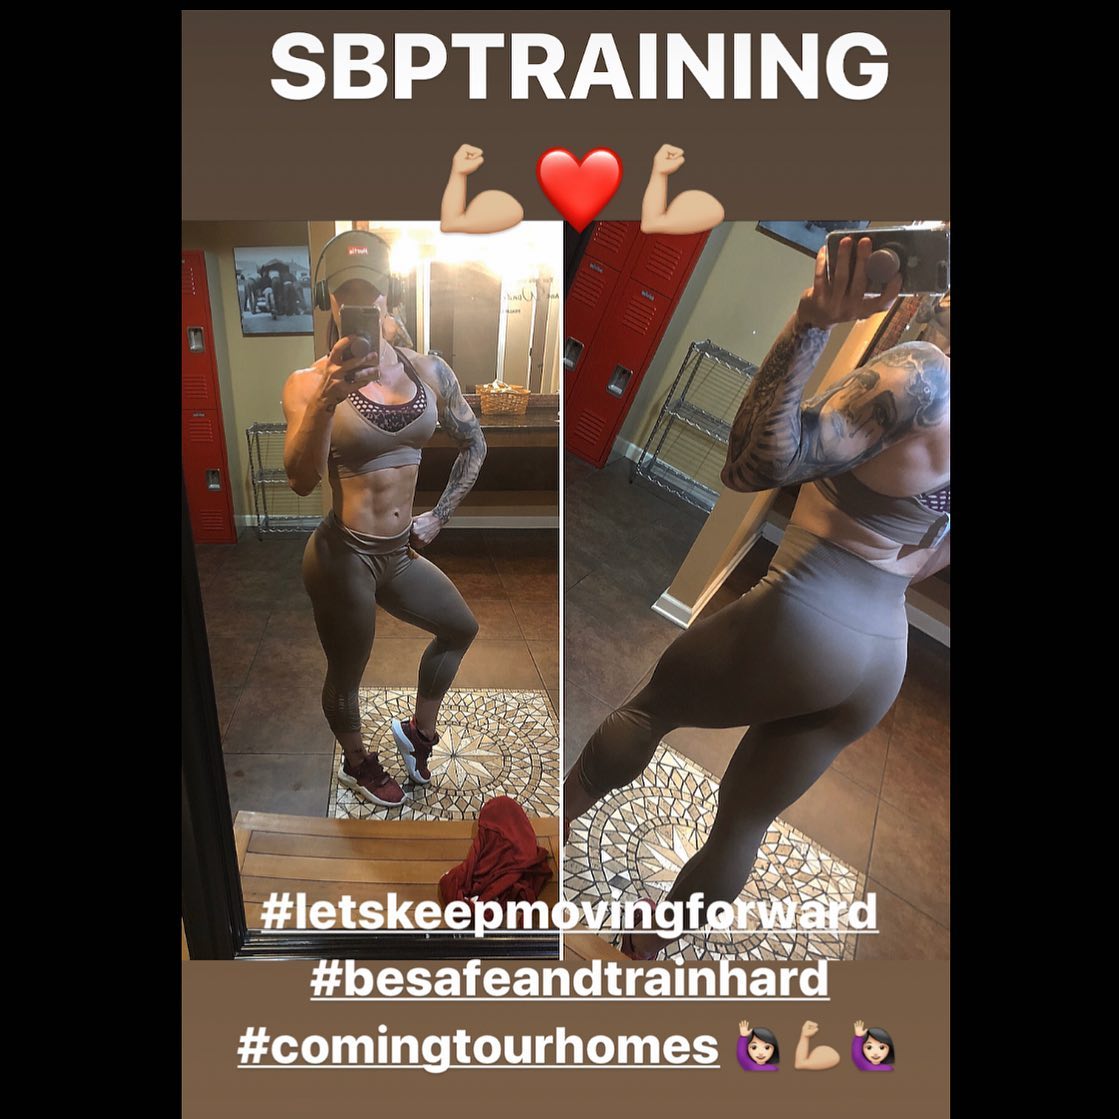 Although I can’t train my clients in my gym right now we still can find other ways to train!! I’m heading out this week to some homes to do In-Home training & others are doing On-Line training, we have options!! If anyone is interested just DM me, clients or just someone that needs a workout to stay sane!! ✨✨SBPTraining✨✨has u covered!! Also clients on meal plans that can’t find some items there’s always substitutions on ur lists!! I will see u all soon!! #staysafe #westilltraining #wewillmakeitthrough #samanthabaker #sbpt #personaltrainer #summerspecial #fitness #fitnessmodel #samsuebaker #npc #ifbb #figure #competitor #ifitfitness #getfit #fitfam #healthylifestyle #workout #dedicated #motivation #inspiration #gettingfit #instahealth #igfitgirls #girlswithmuscle #competitionprep #gethealthy